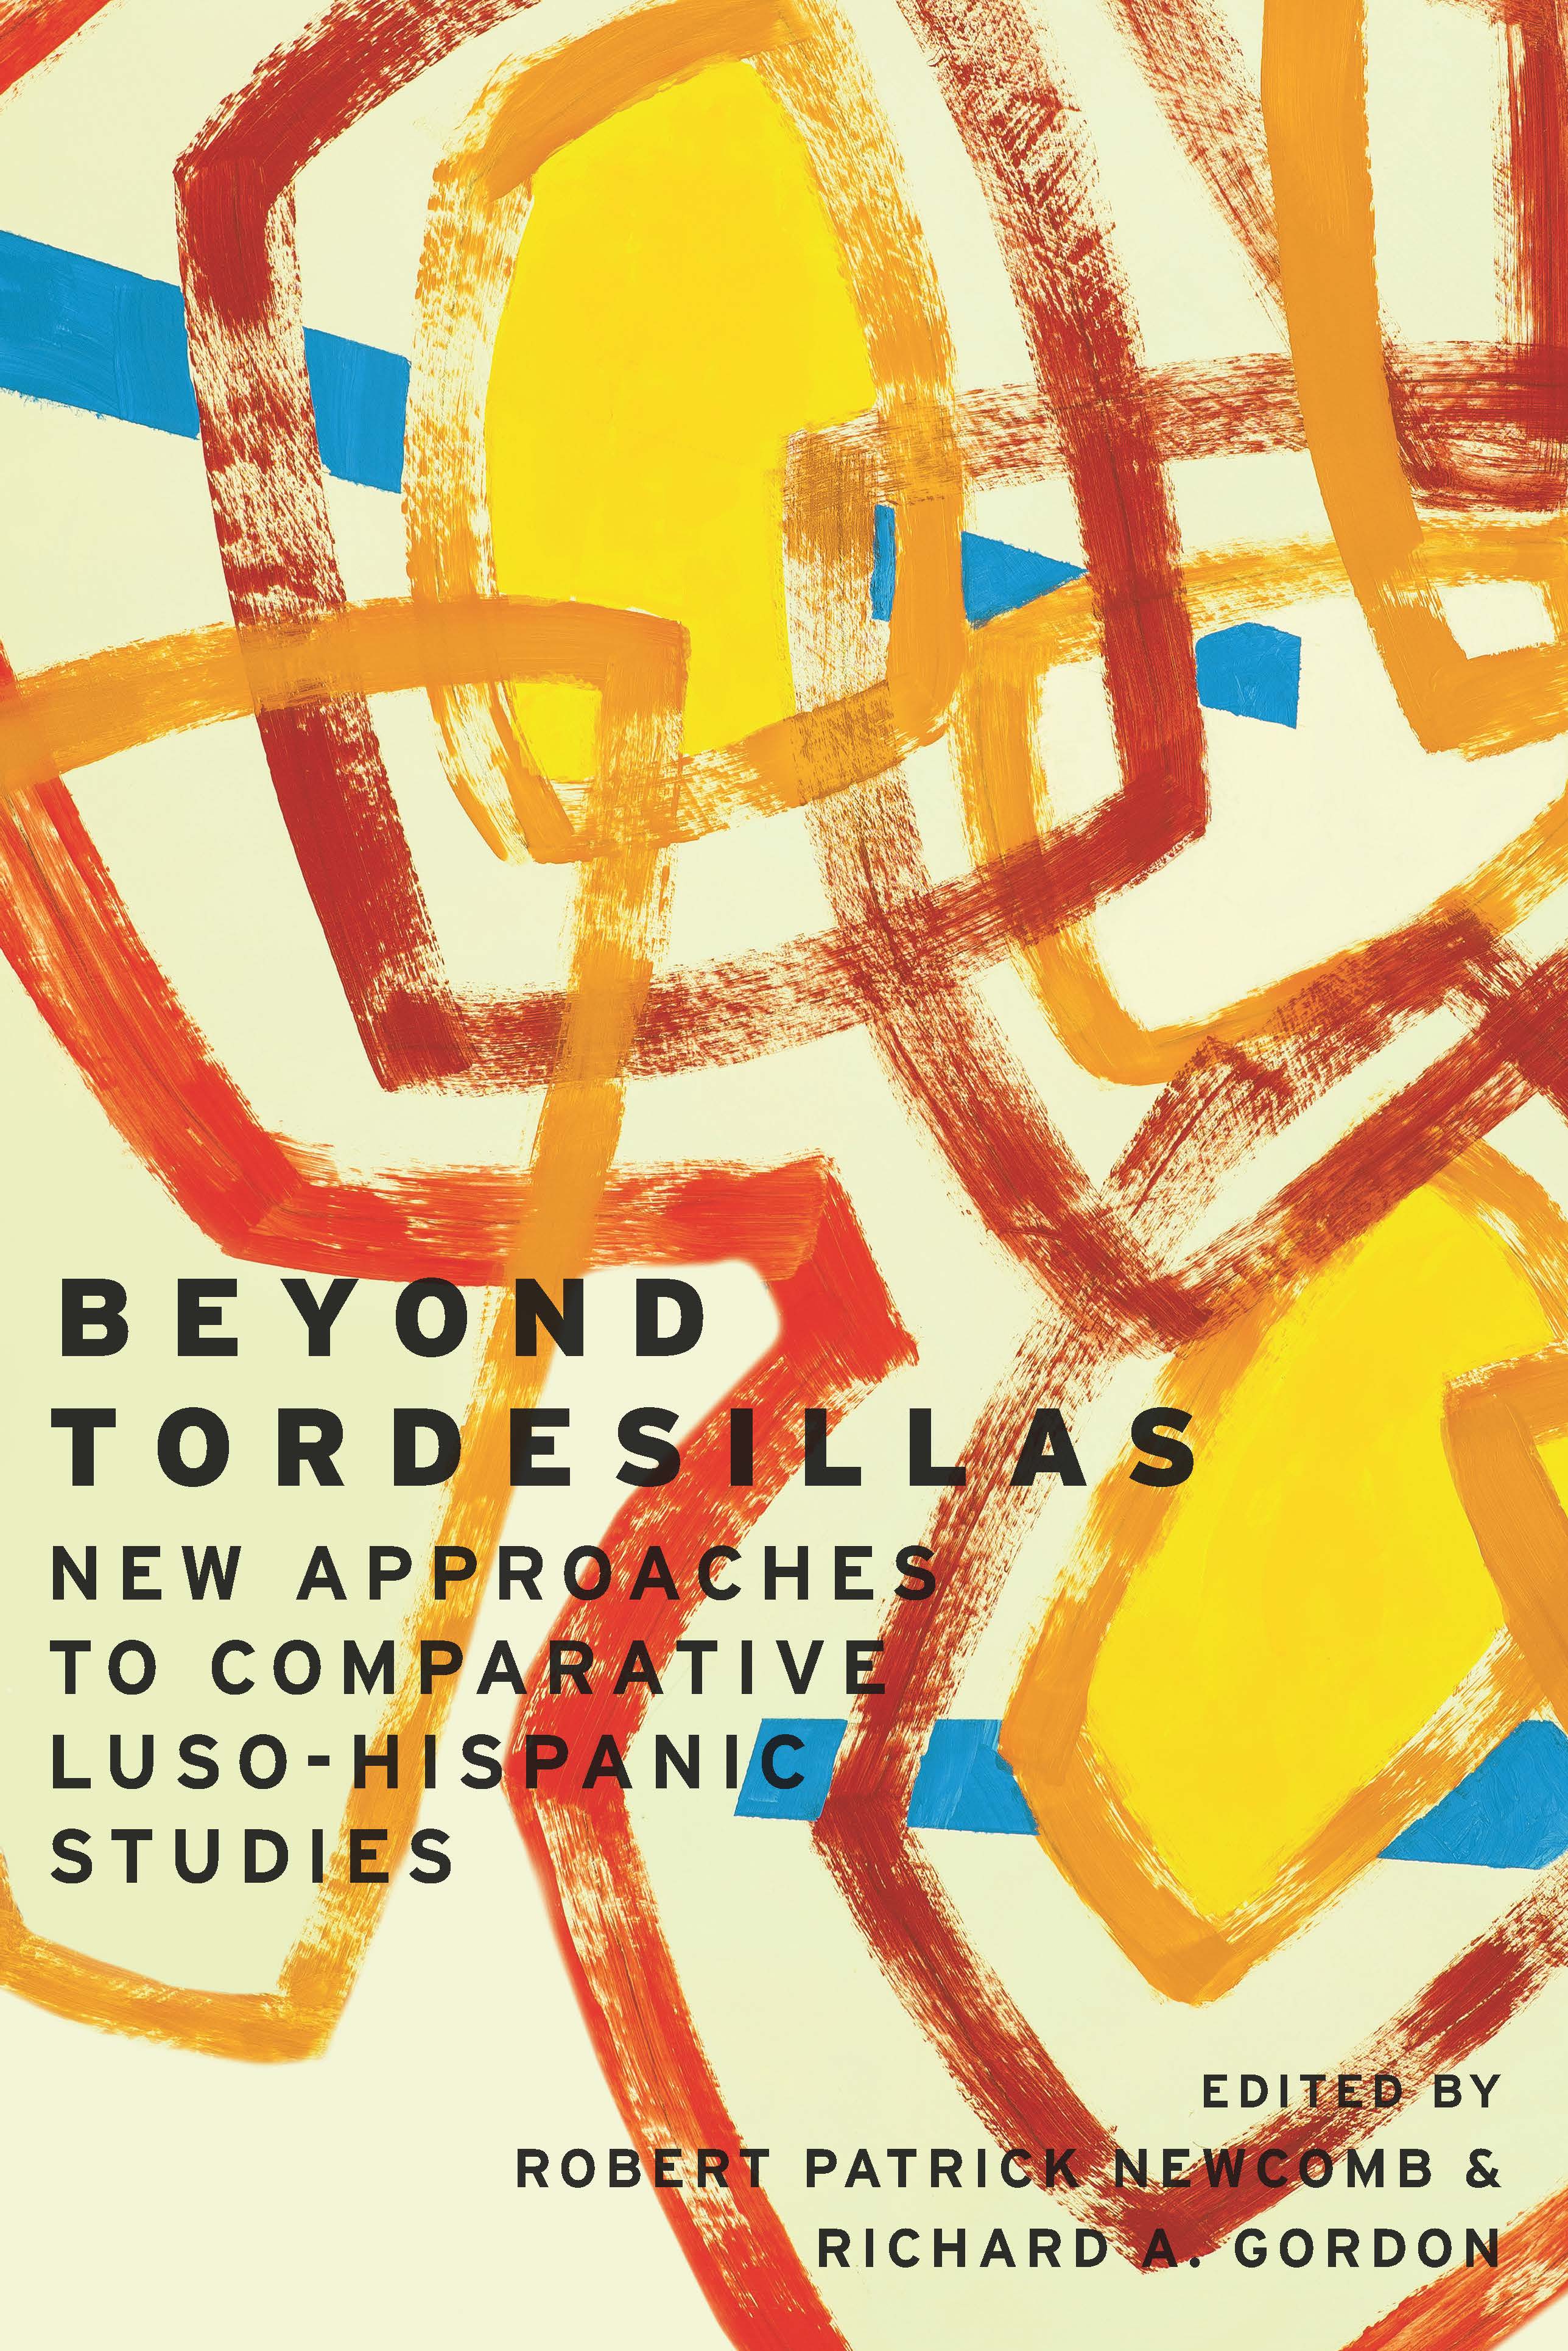 Beyond Tordesillas: New Approaches to Comparative Luso-Hispanic Studies cover